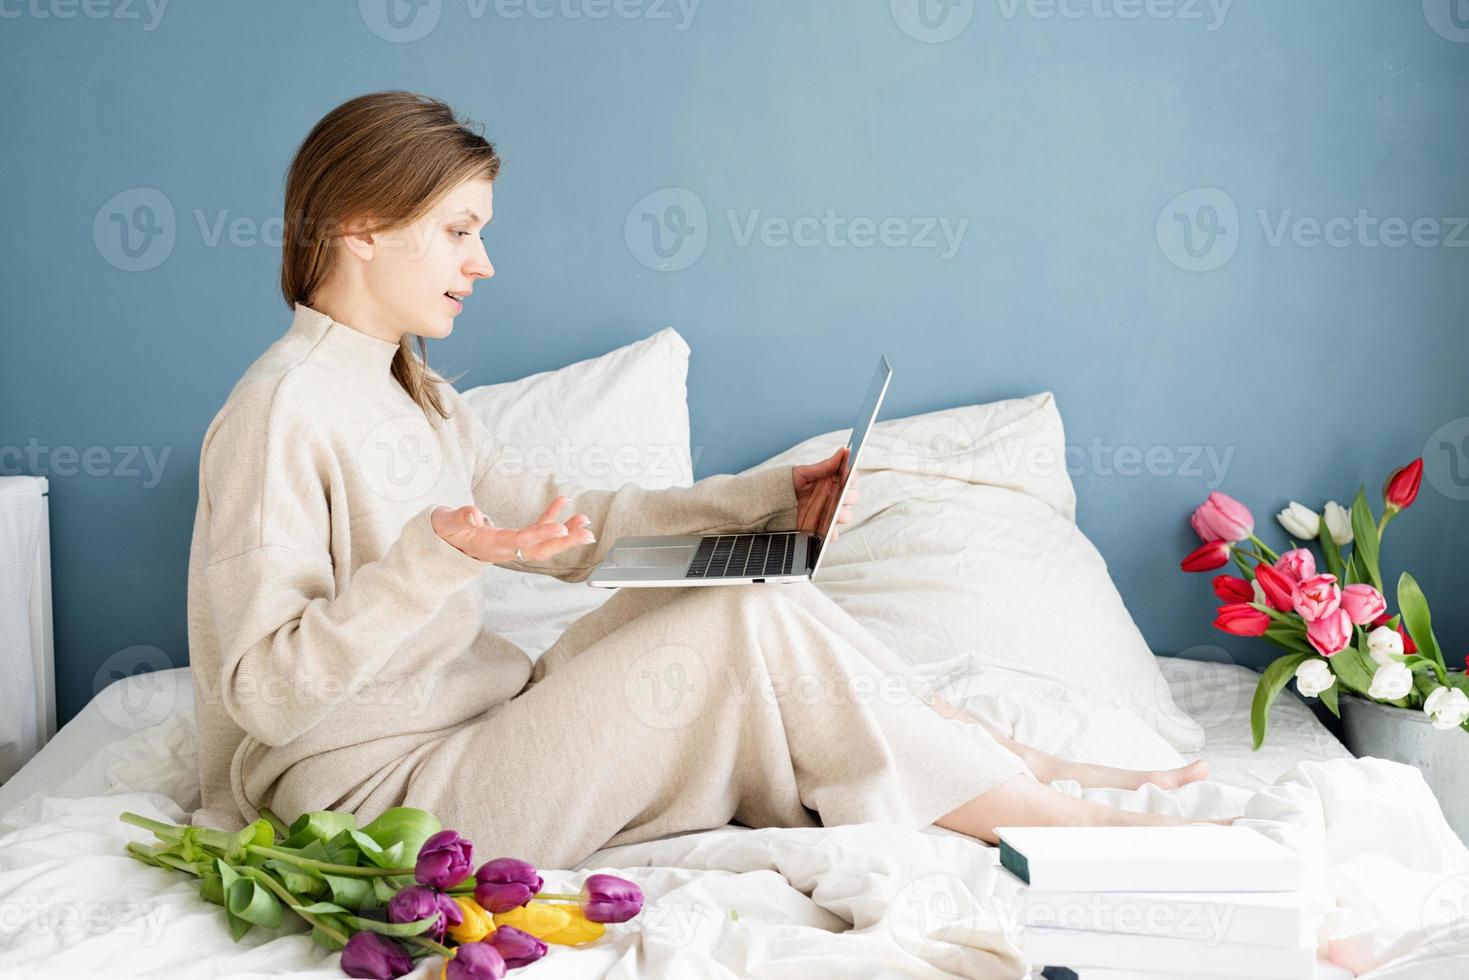 woman sitting on the bed wearing pajamas chatting on laptop photo